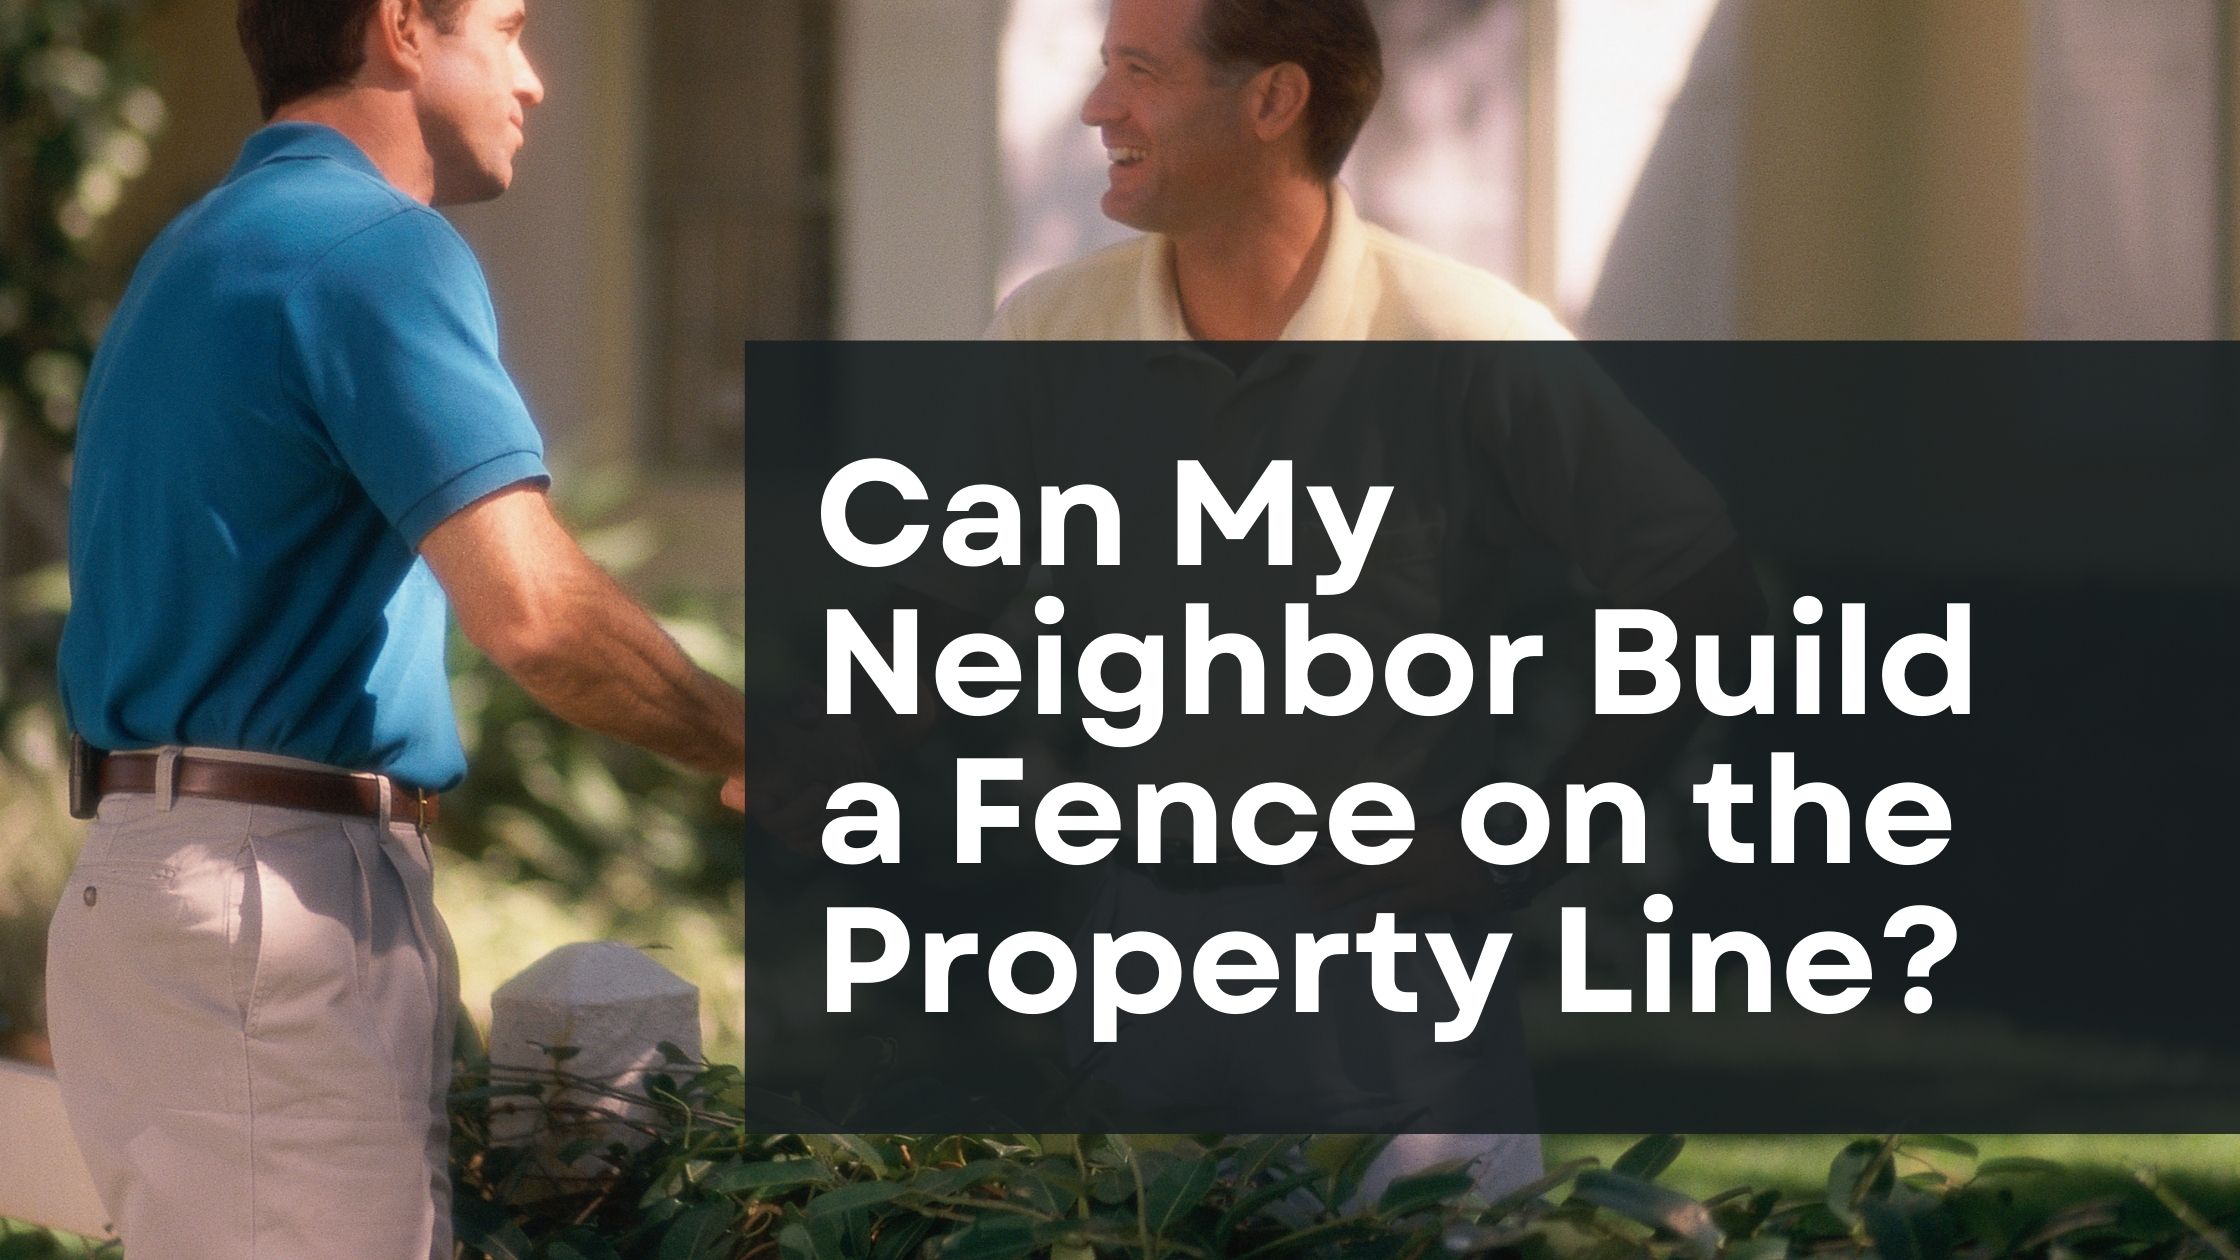 Can My Neighbor Build a Fence on the Property Line?